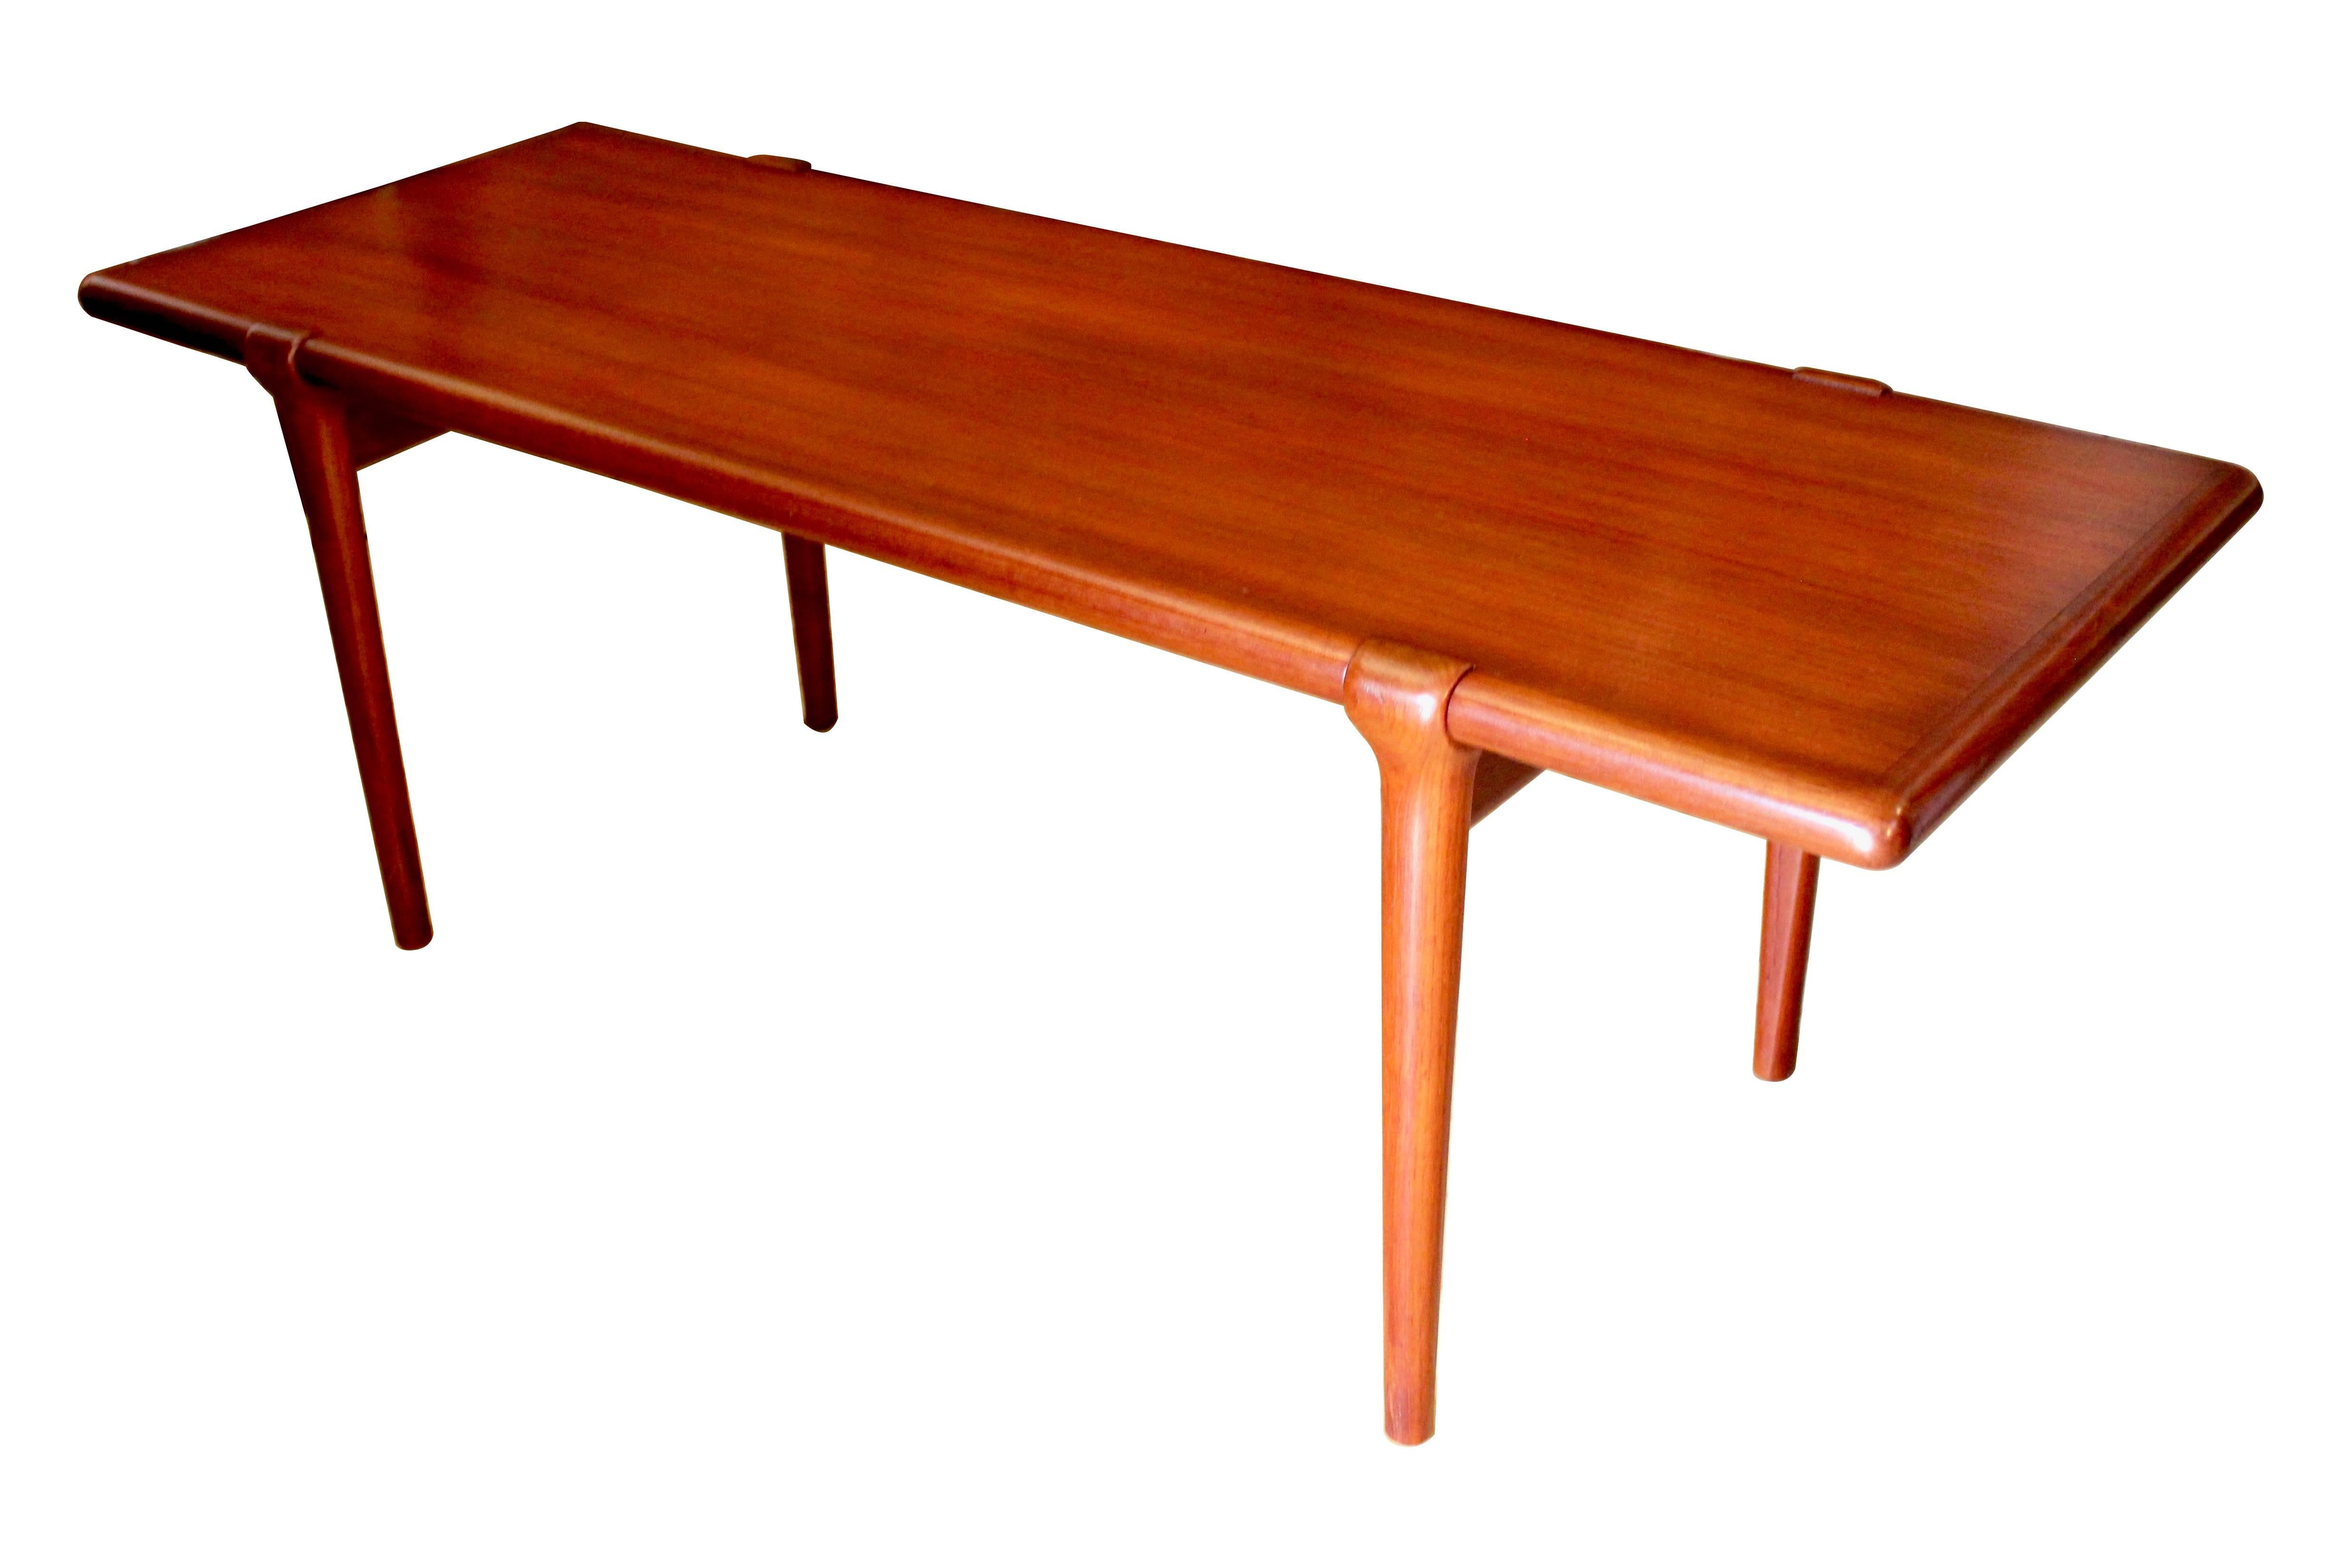 1950s, Danish modern teak coffee table designed by Johannes Andersen for Uldum Møbelfabrik. In excellent condition with no marks or scratches. An early design by Andersen, with a very nice detail in which the legs wrap over the edges of the tabletop.